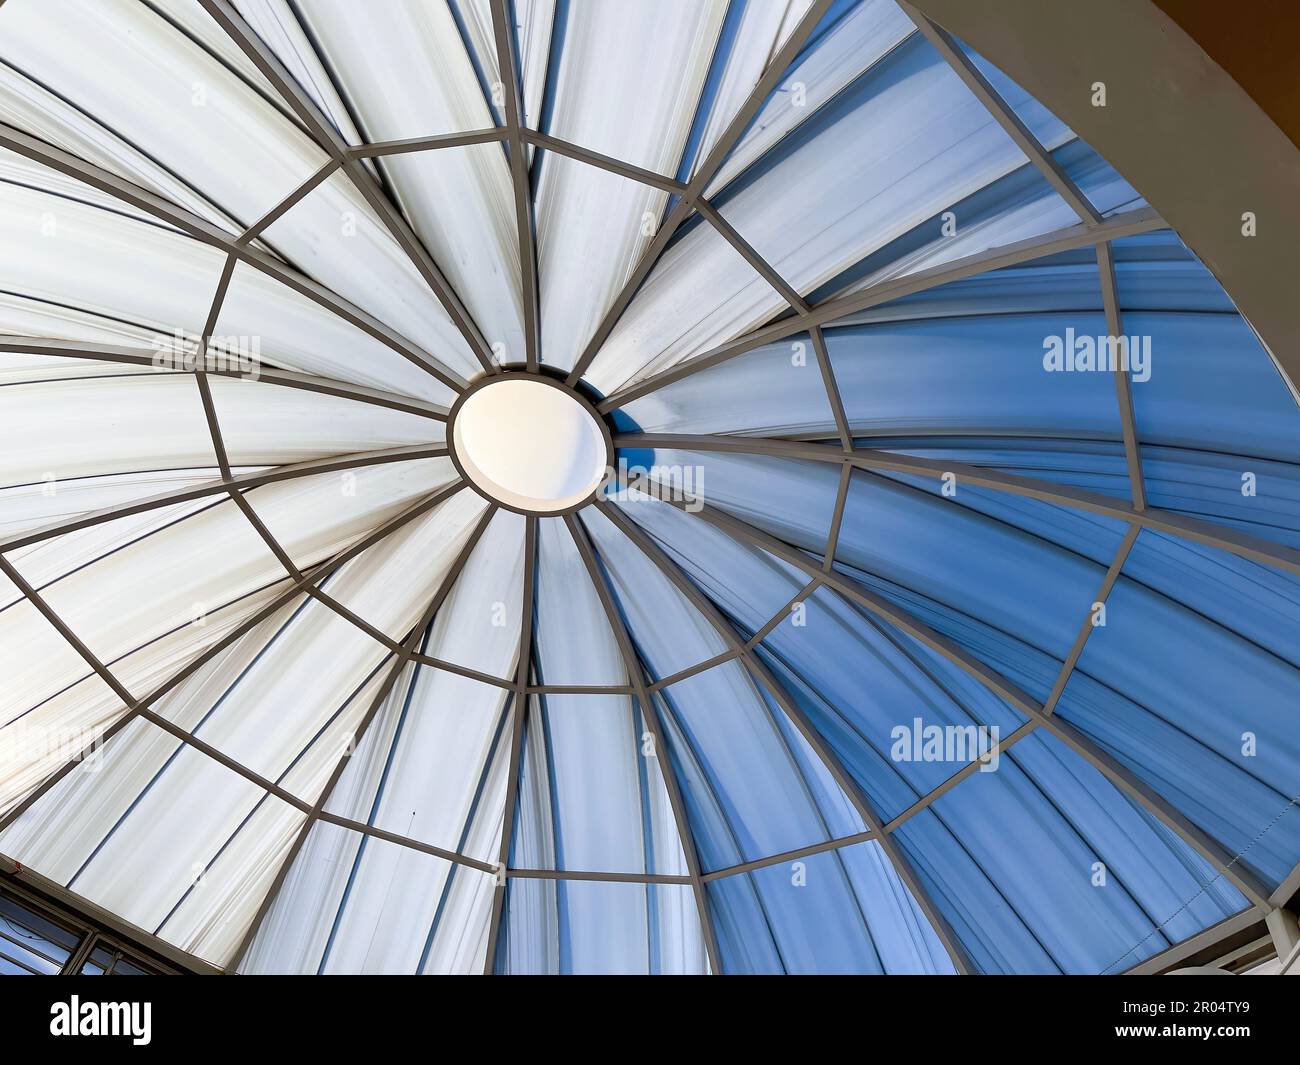 a large skylight dome, with radial structure, large rooflight with slashes coming from the center outward, blue and white tones horizontal Stock Photo